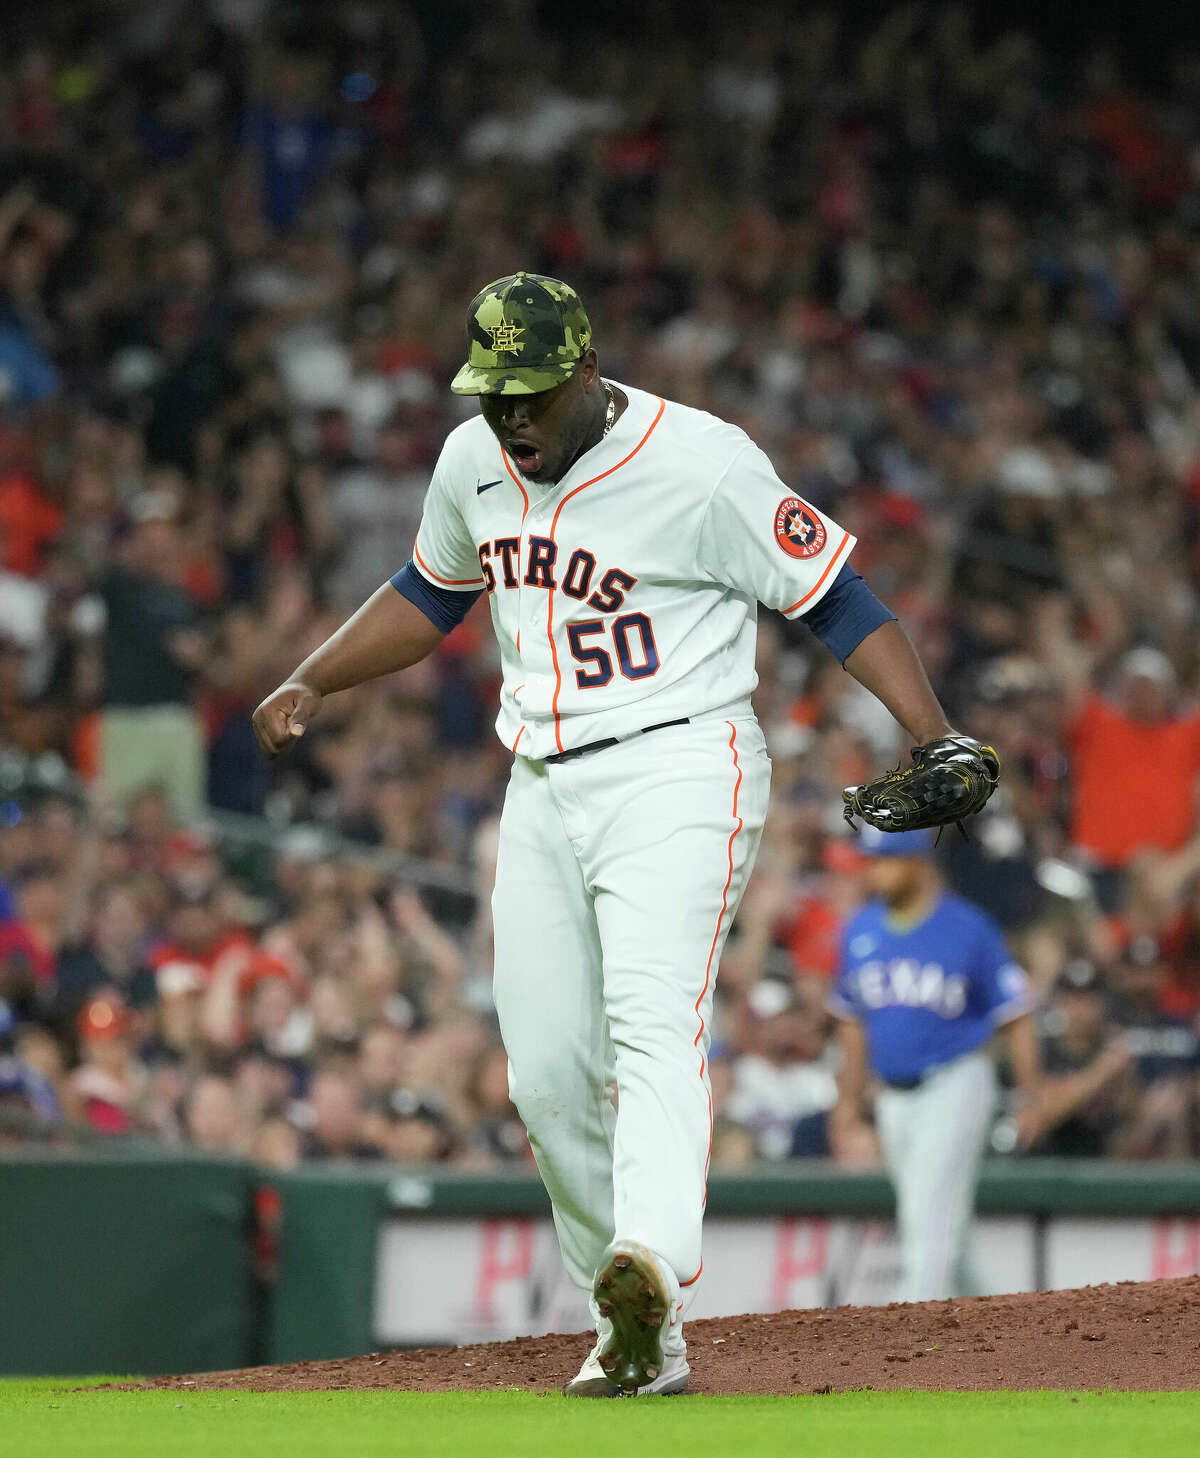 Houston Astros relief pitcher Hector Neris (50) reacts after striking out Texas Rangers right fielder Kole Calhoun (56) to end the top of the eighth inning of an MLB game at Minute Maid Park on Saturday, May 21, 2022 in Houston.